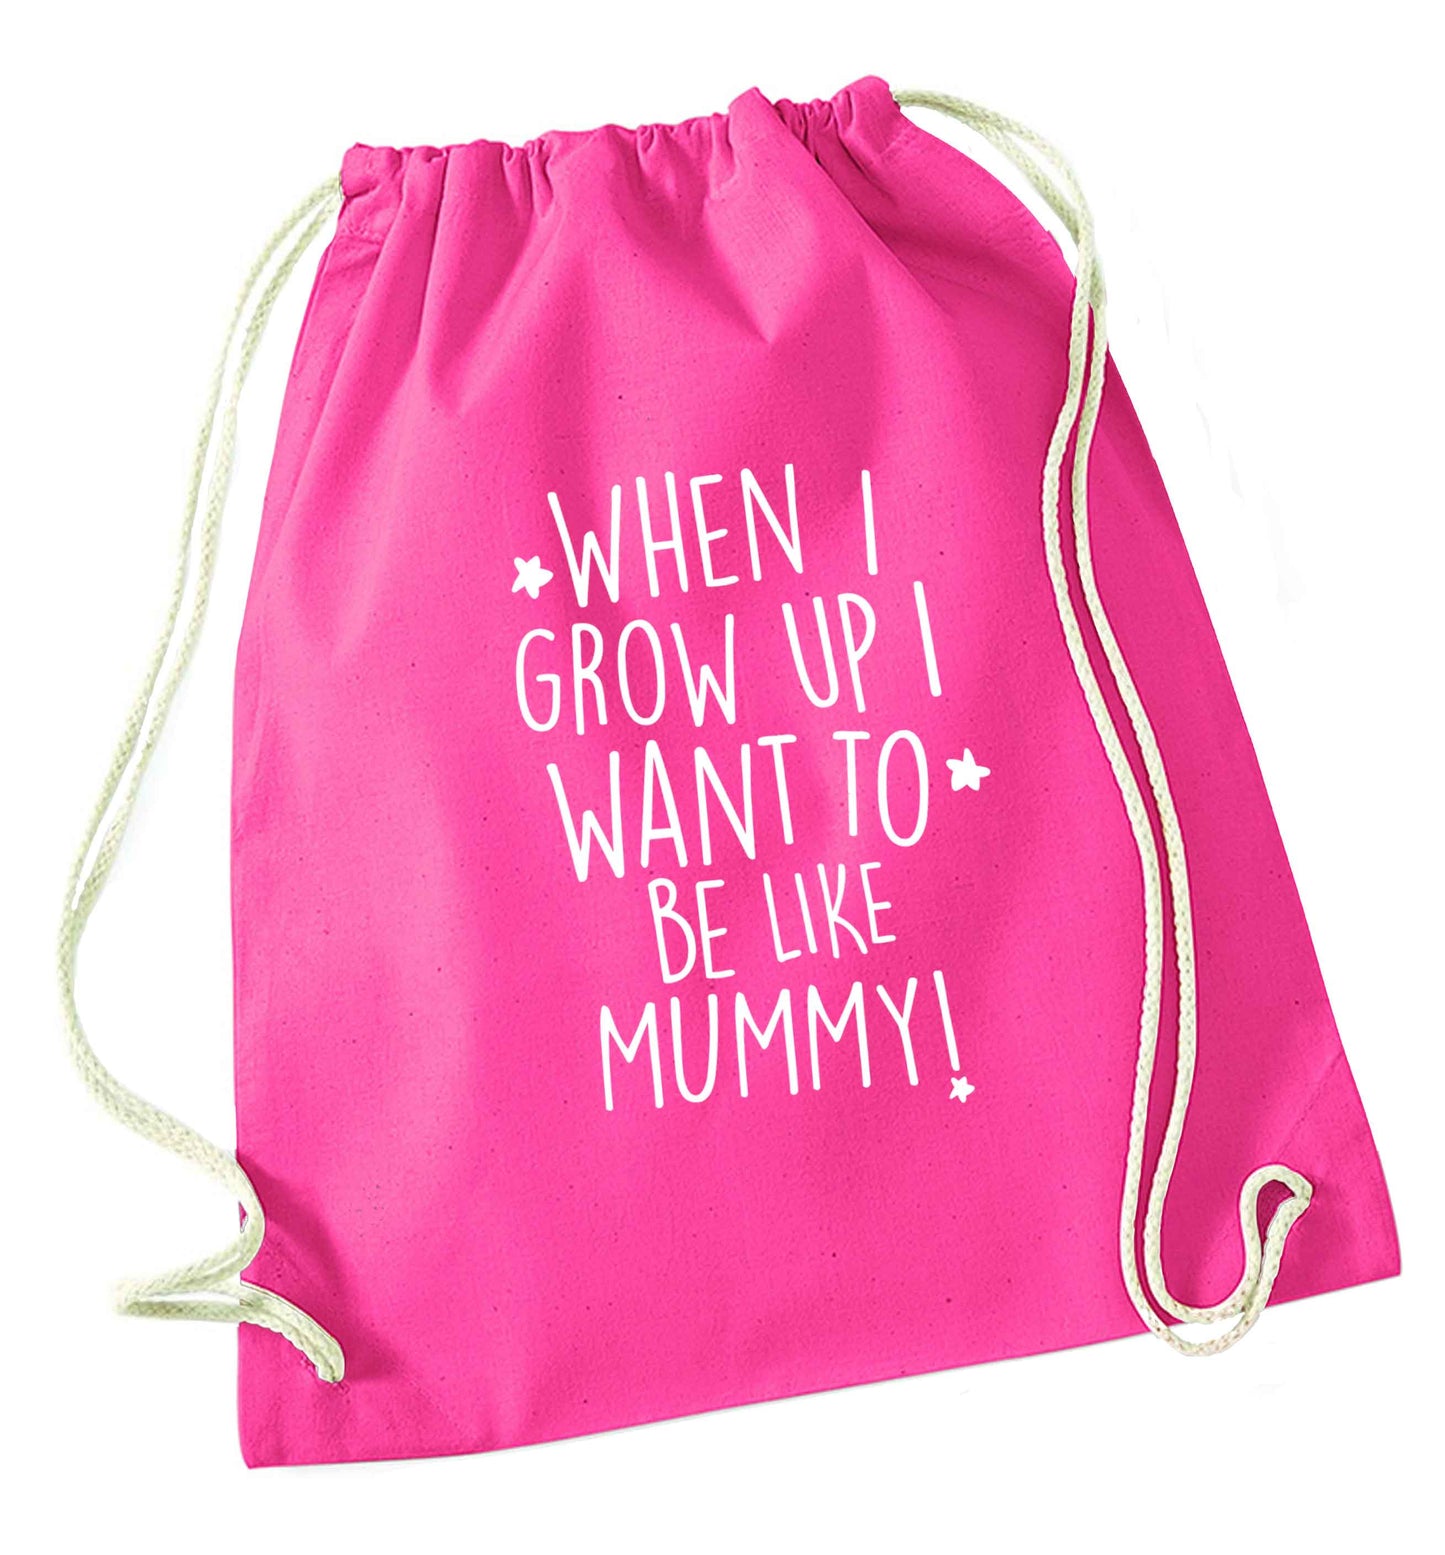 When I grow up I want to be like my mummy pink drawstring bag